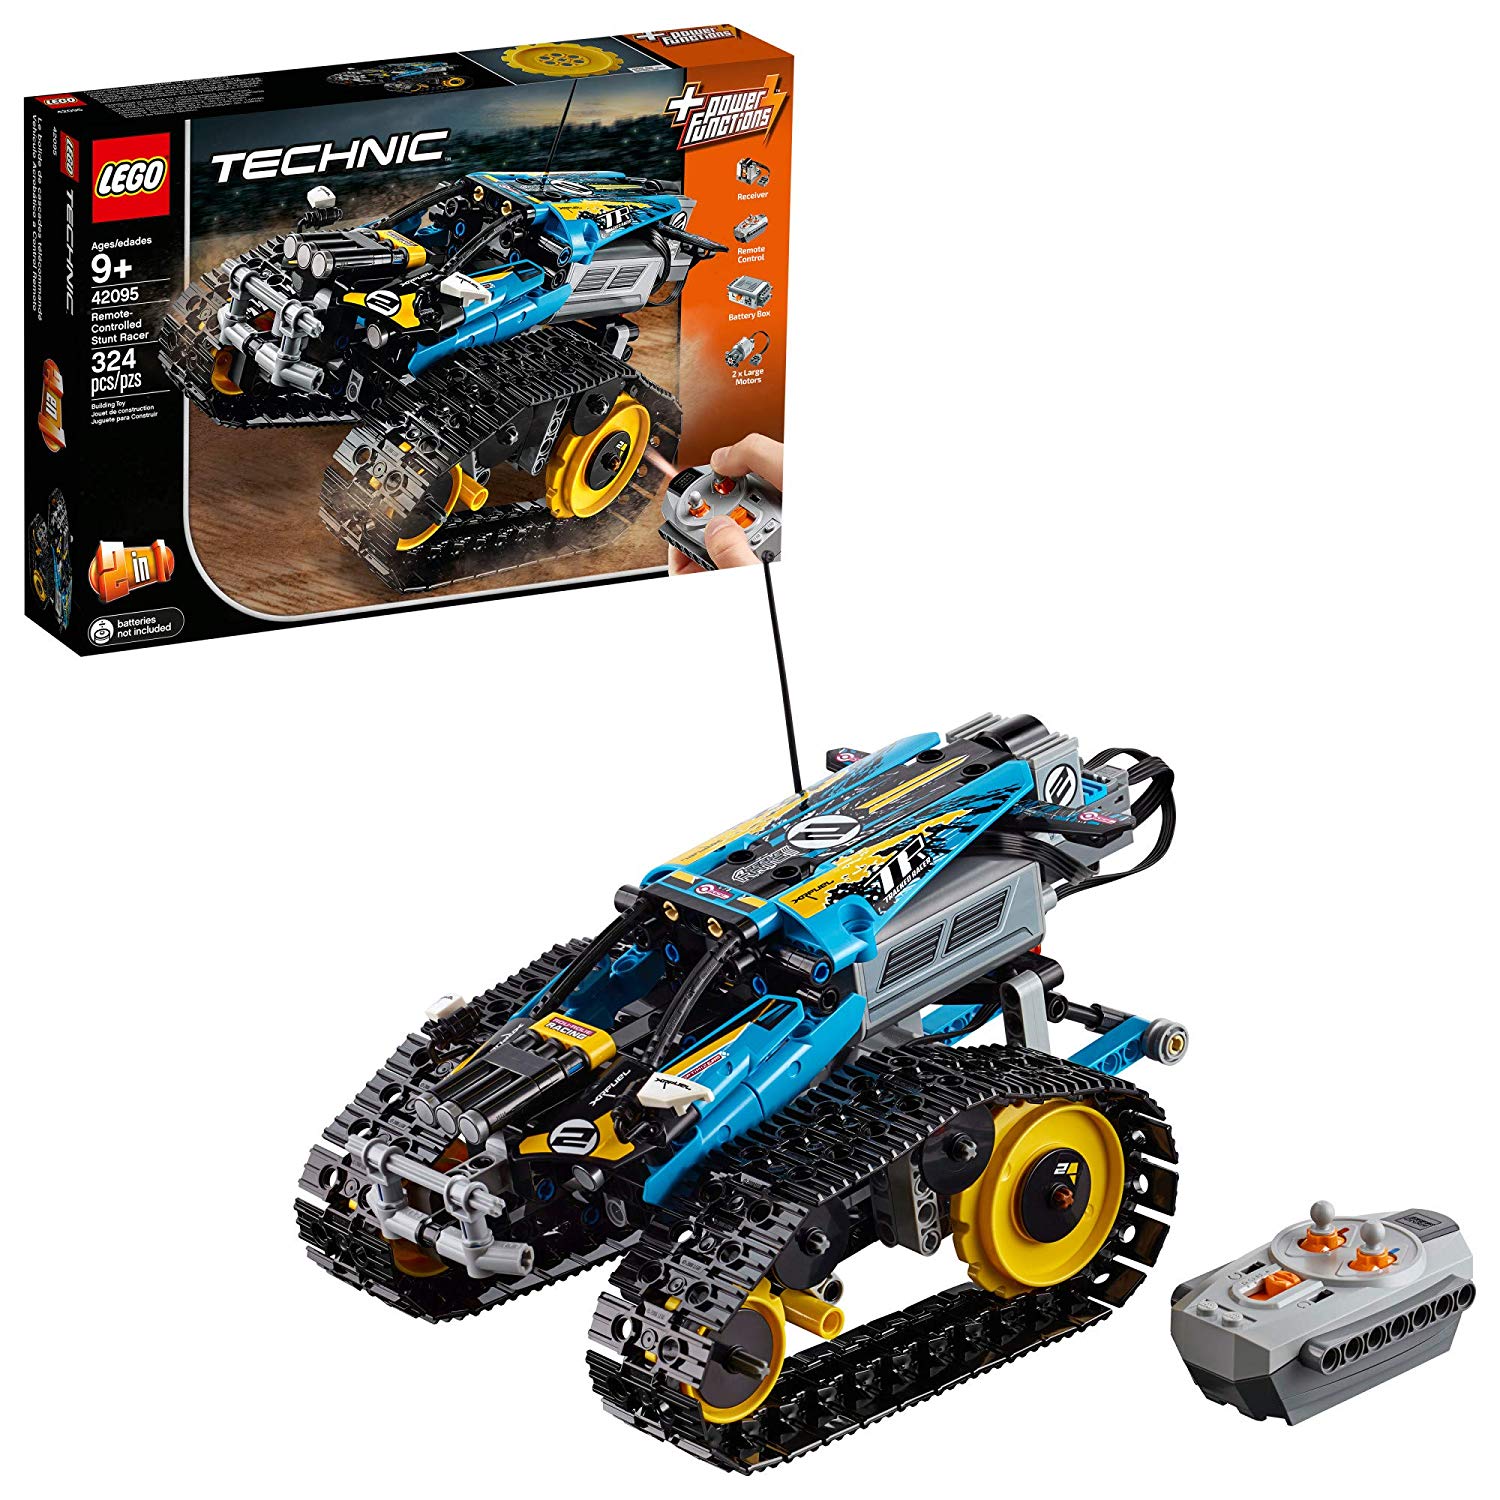 Technic Lego 42095 Remote Controlled Stunt Racer Kit New 2019 (324 Pieces)